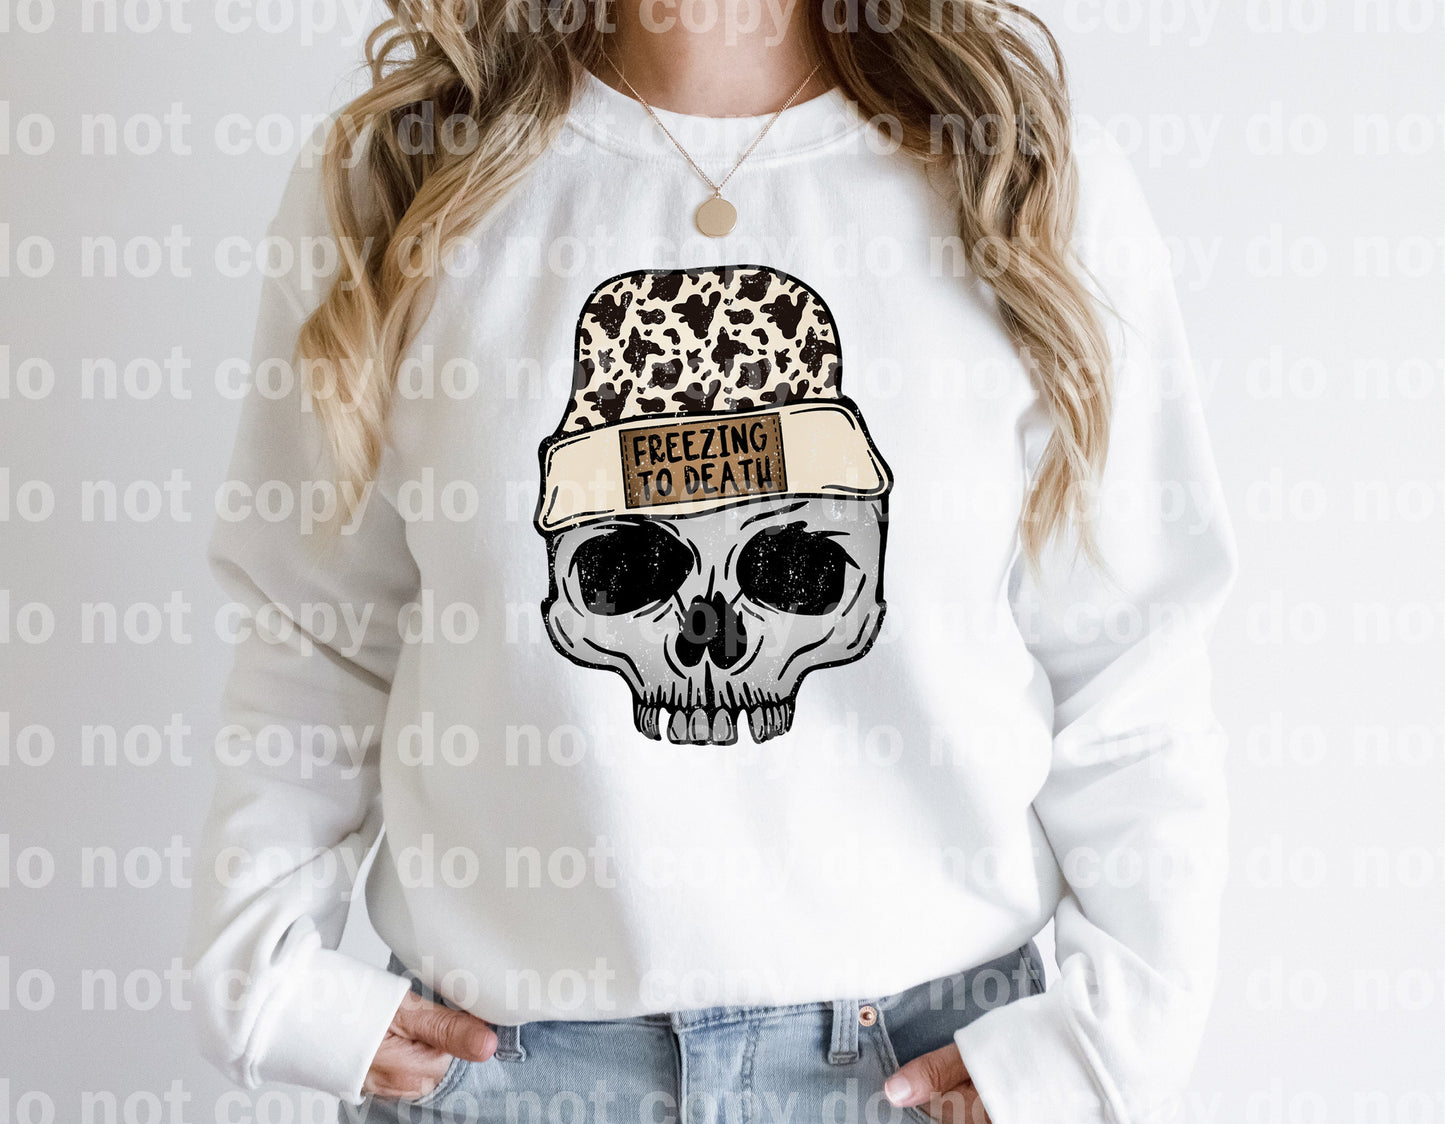 Freezing To Death Cow Print Distressed Full Color/One Color Dream Print or Sublimation Print